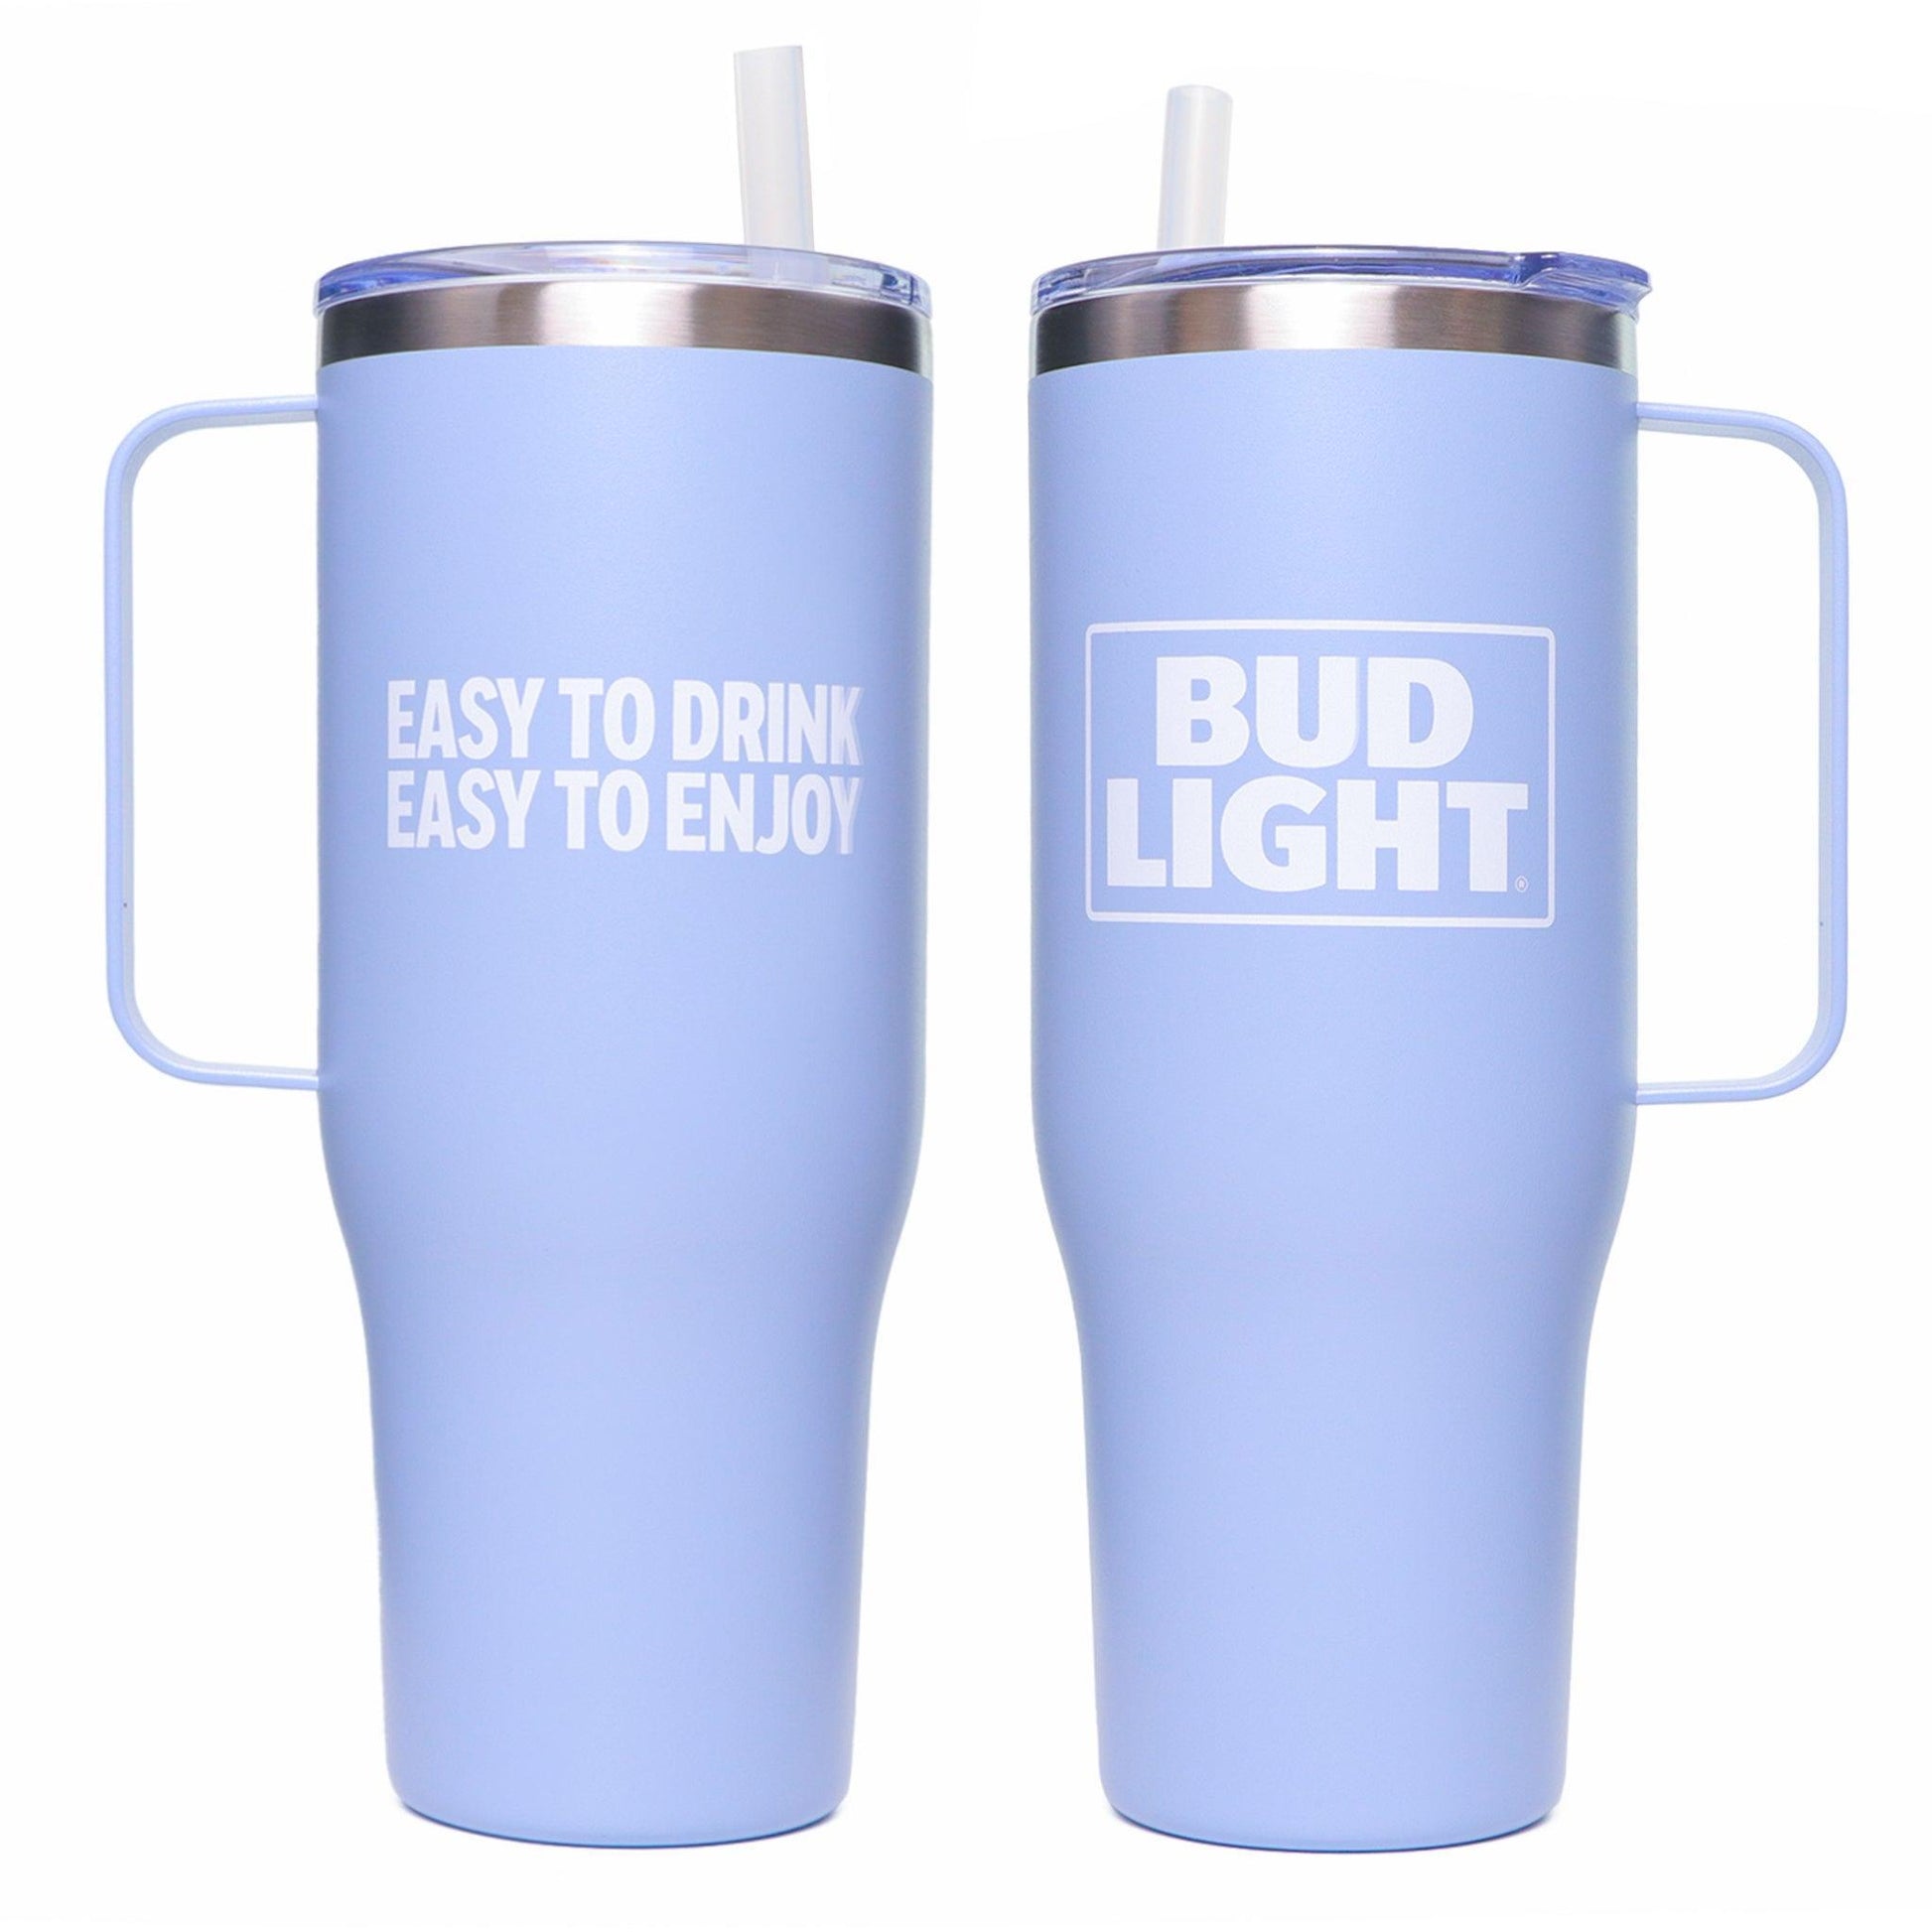 right image screenprinted easy to drink easy to enjoy left image Bud light stacked logo 